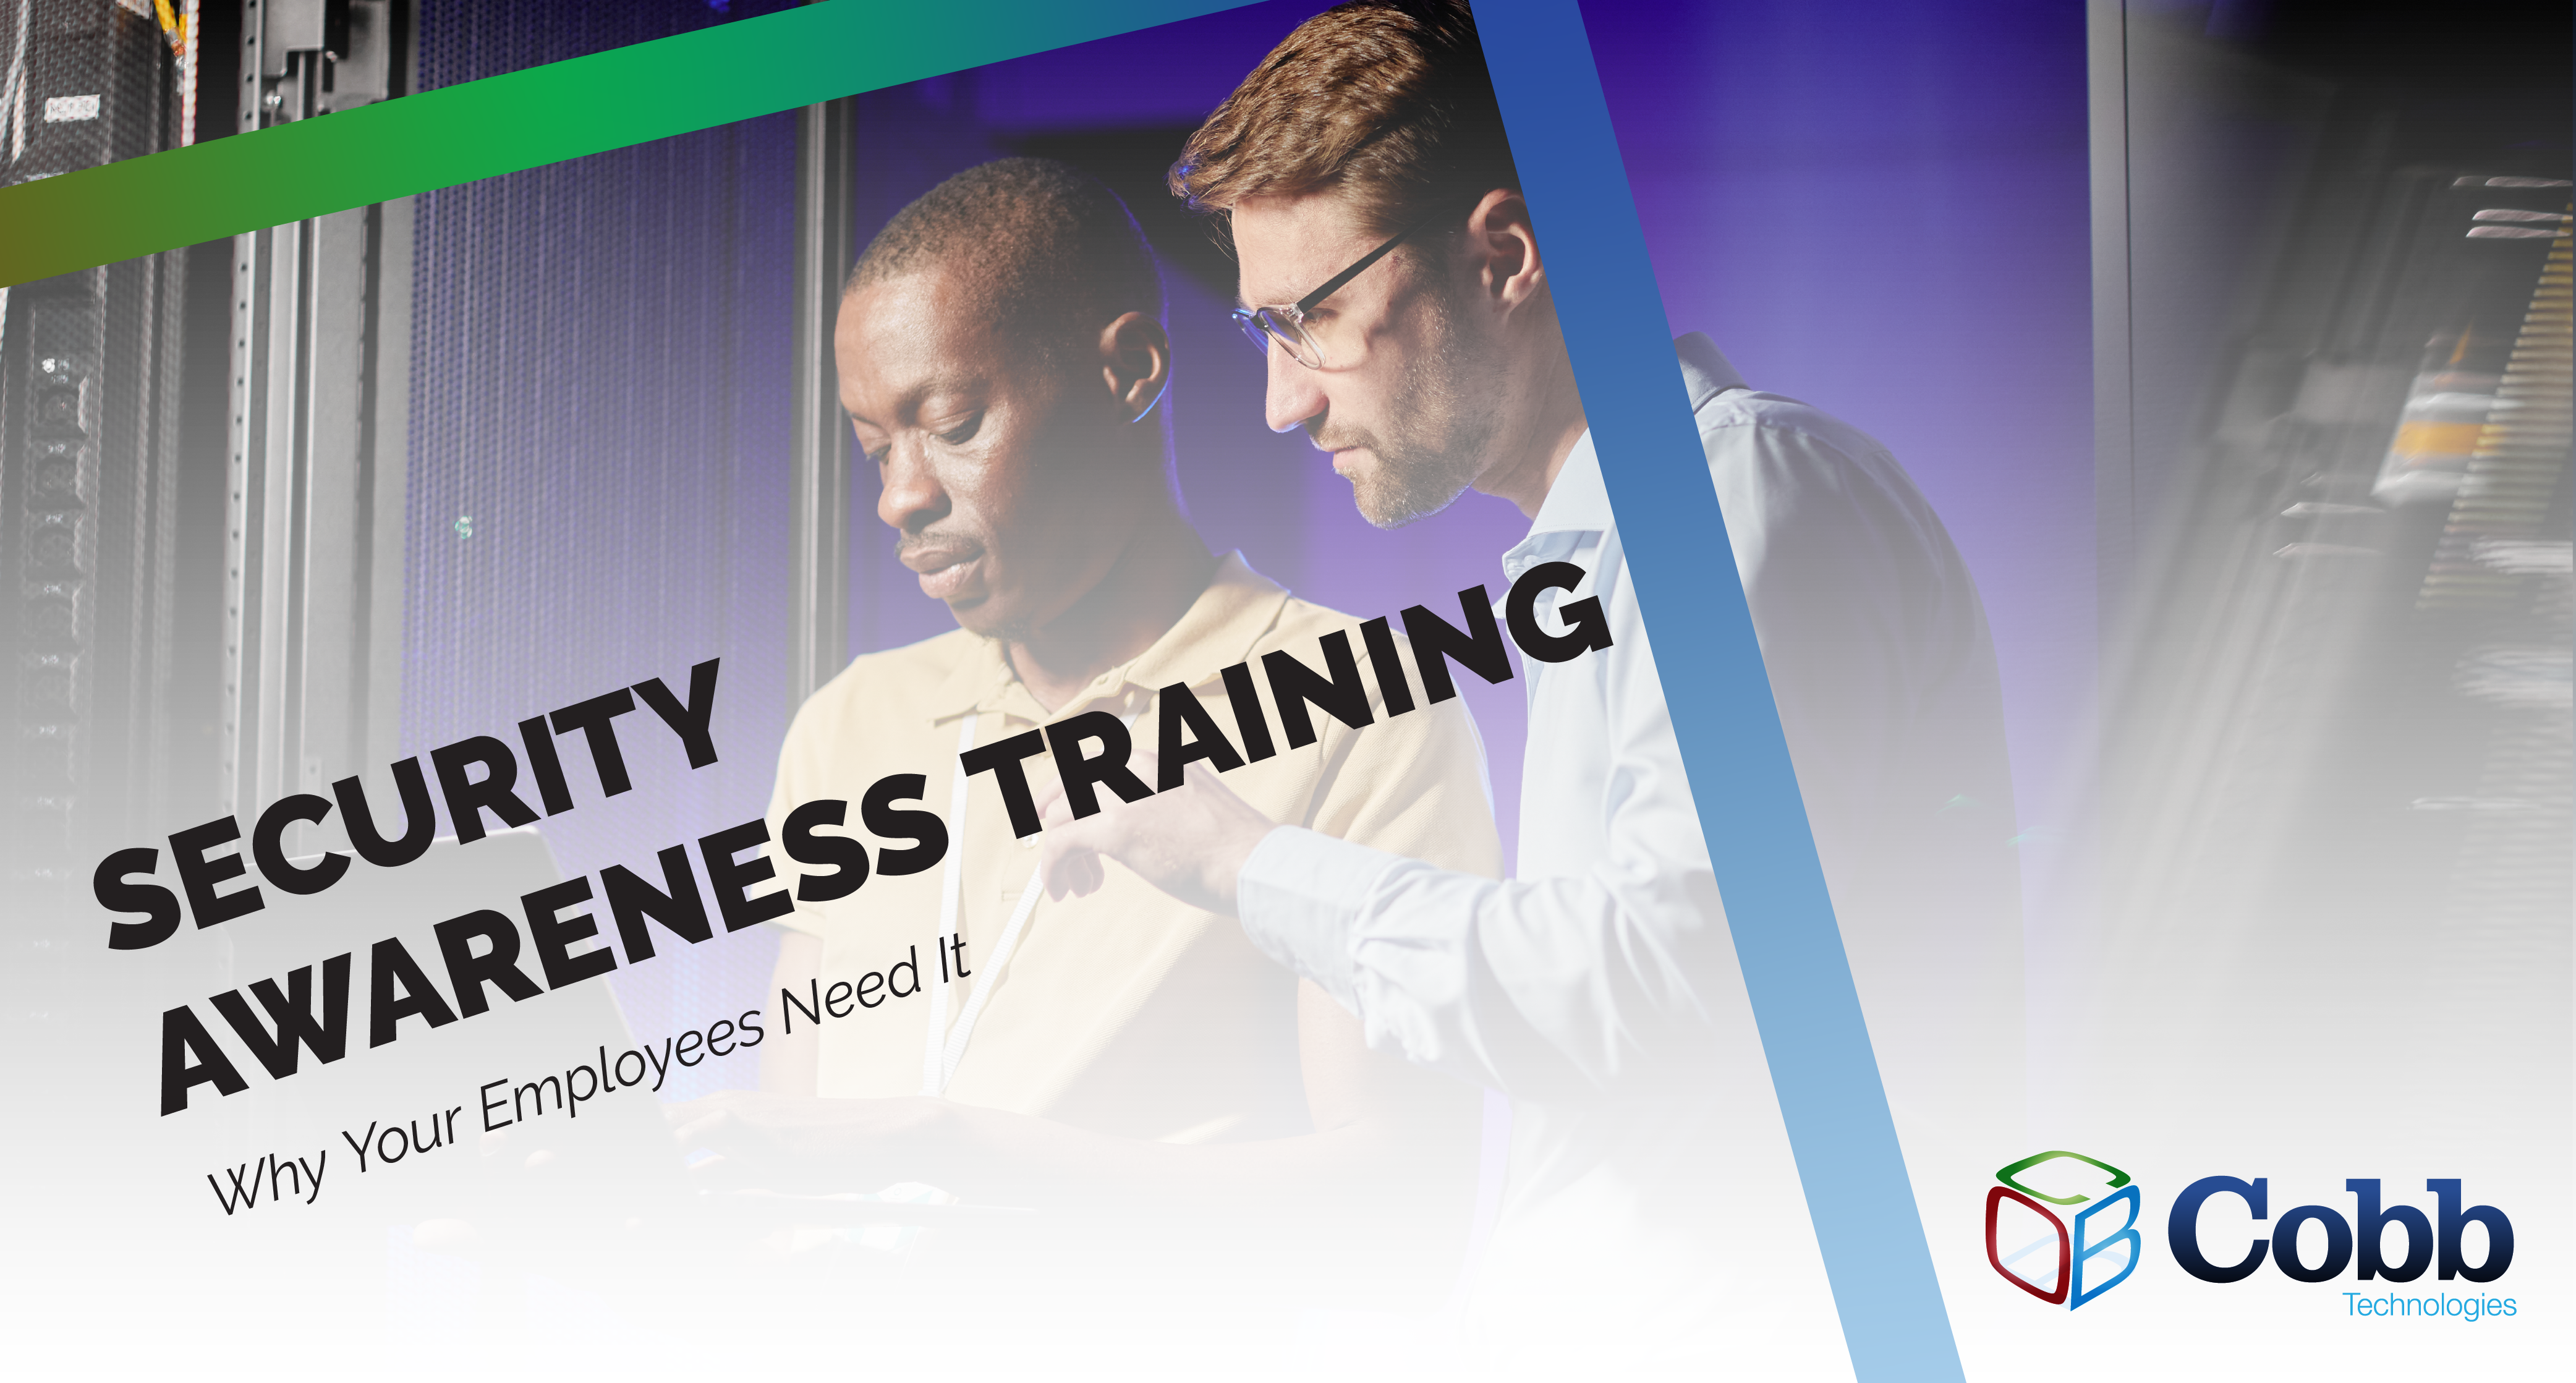 Security Awareness Training: Why Your Employees Need It